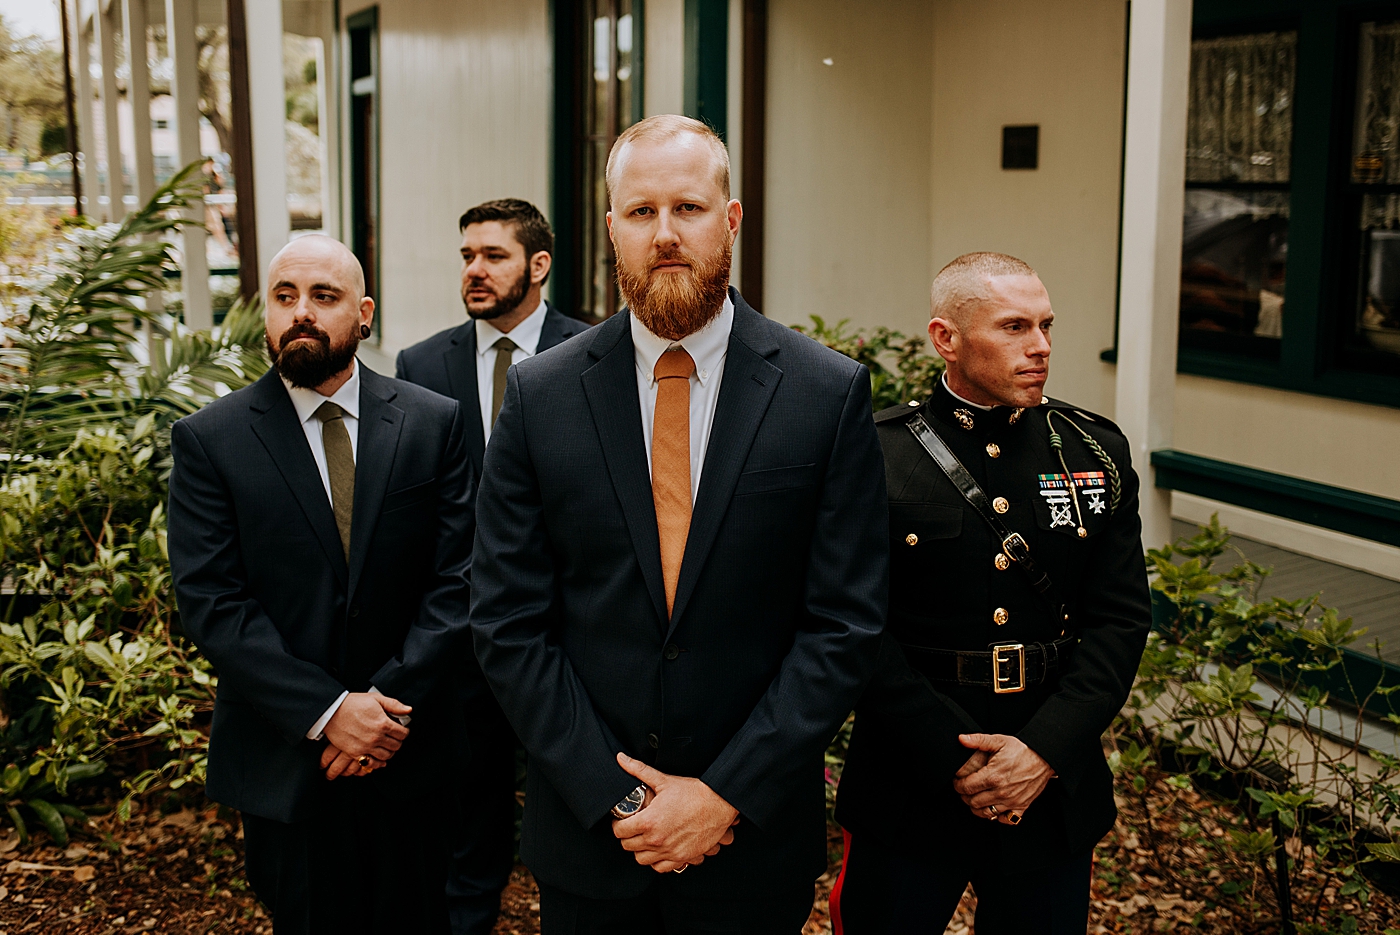 Groom and Groomsmen posing Historic Stranahan House Wedding Photography captured by South Florida Wedding Photographer Maggie Alvarez Photography